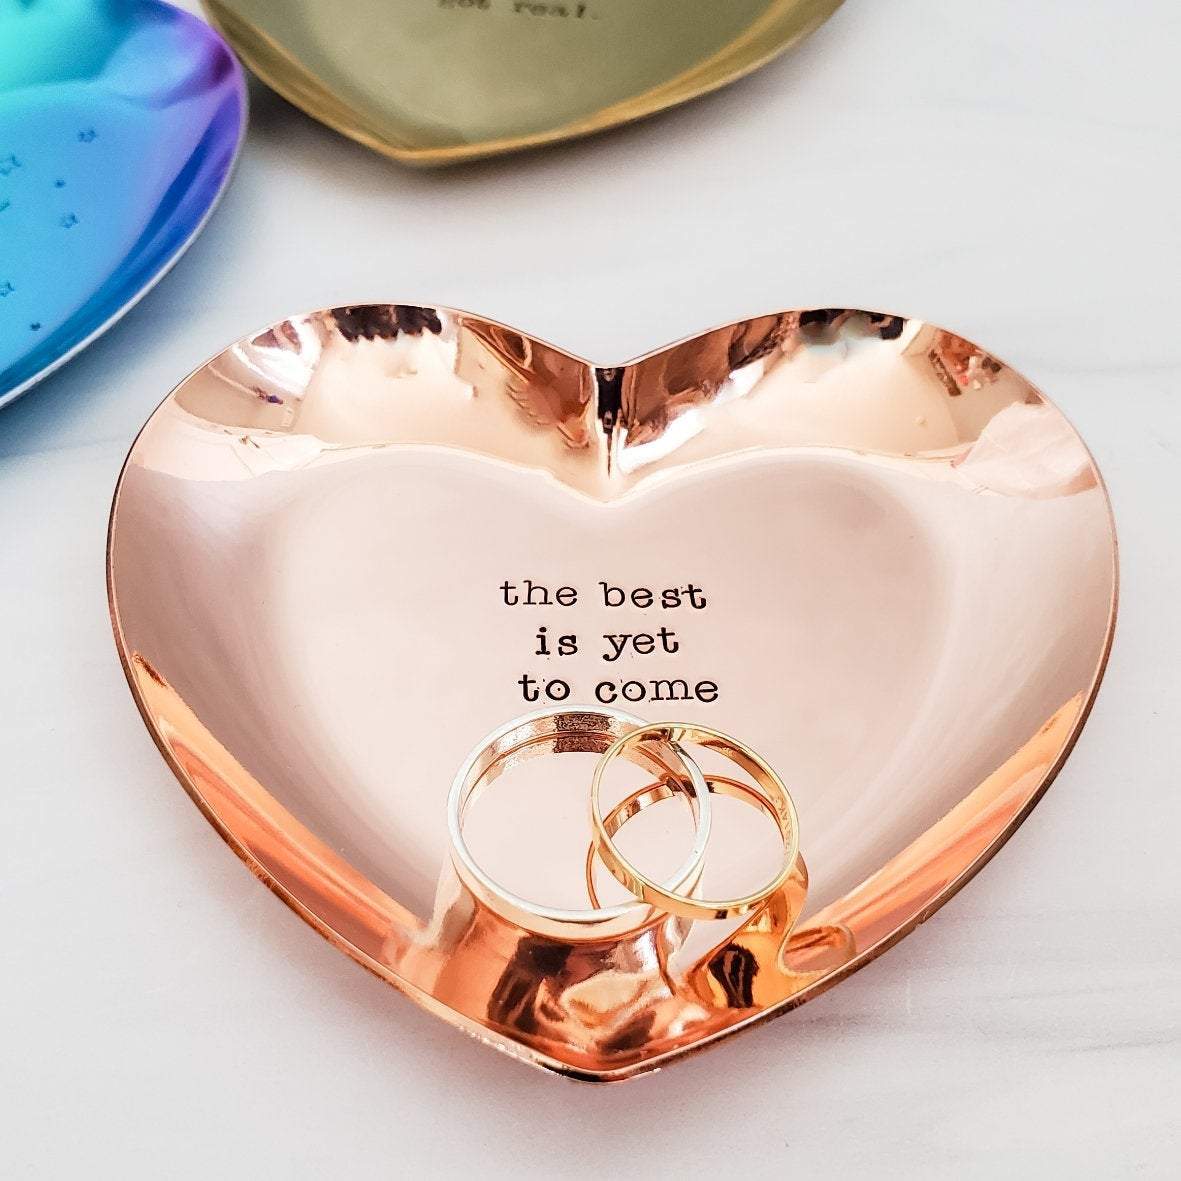 The Best is Yet to Come Heart-Shaped Engagement Ring Dish Salt and Sparkle